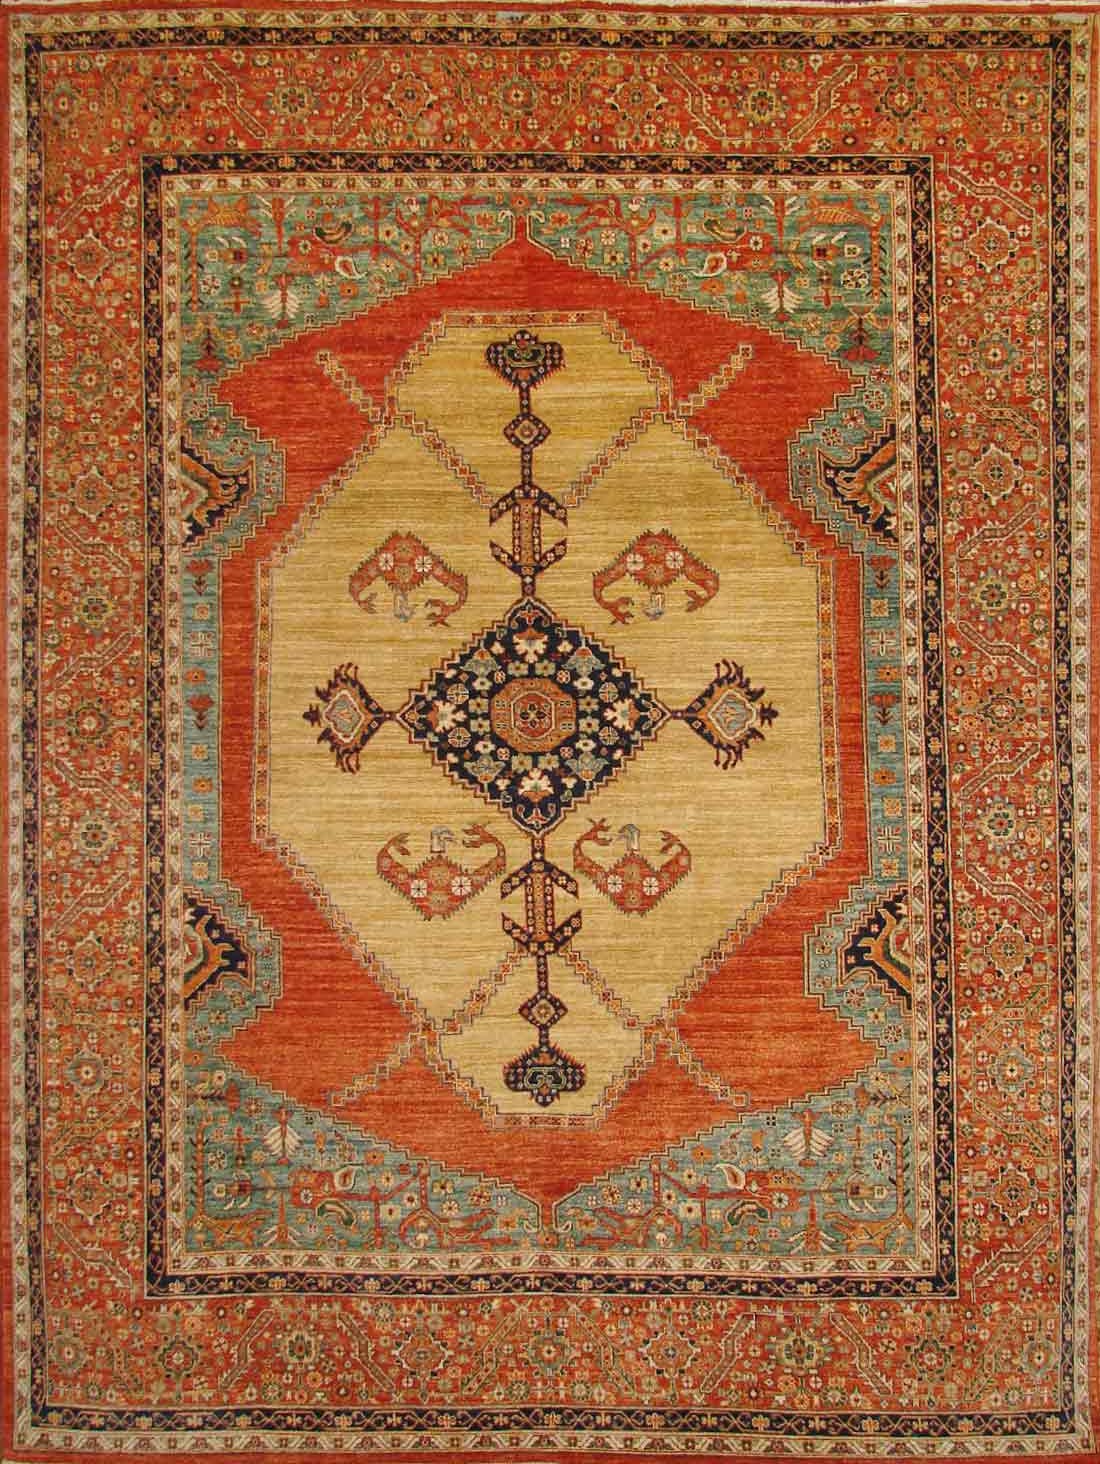 Antique Style Rugs ARYANA 19570 Lt. Gold - Gold & Rust - Orange Hand Knotted Rug